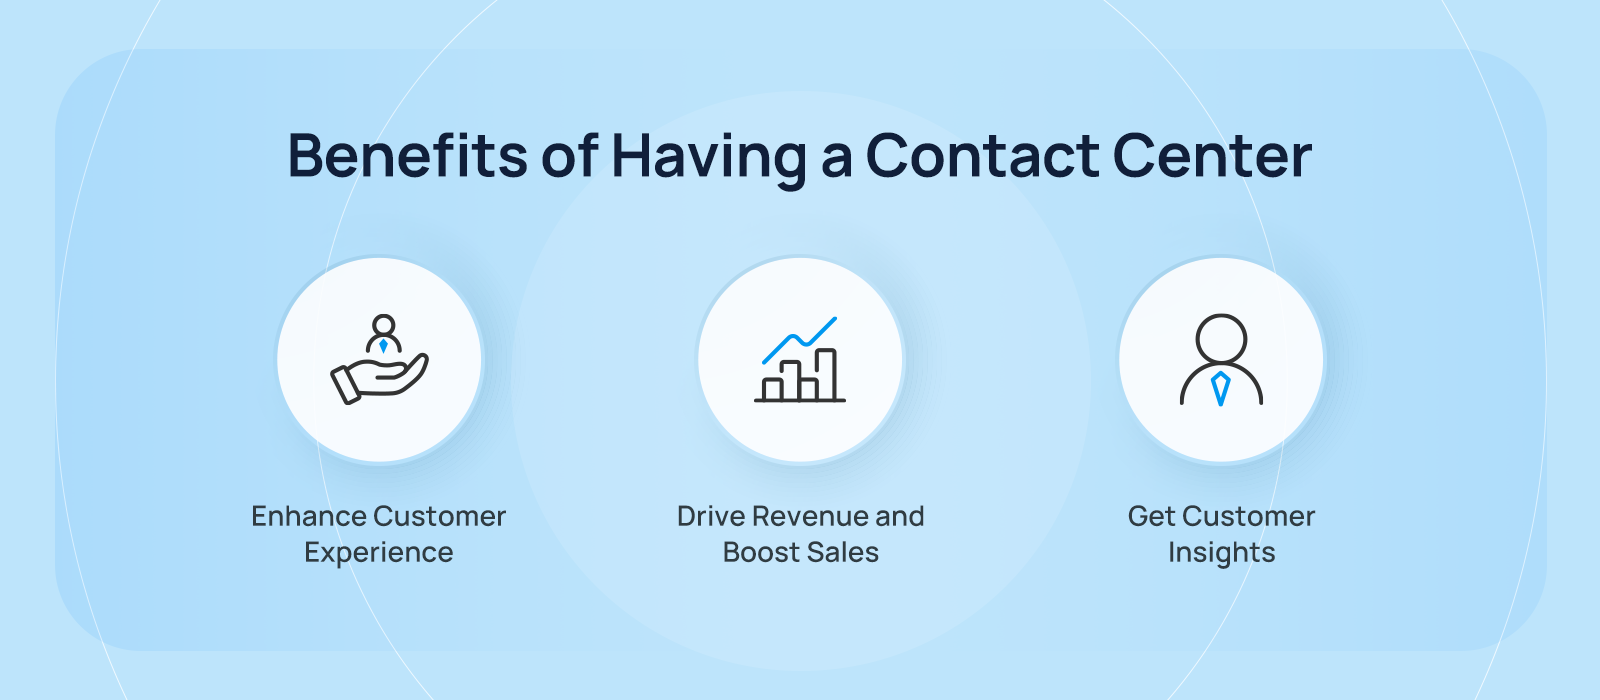 Benefits of Having a Contact Center